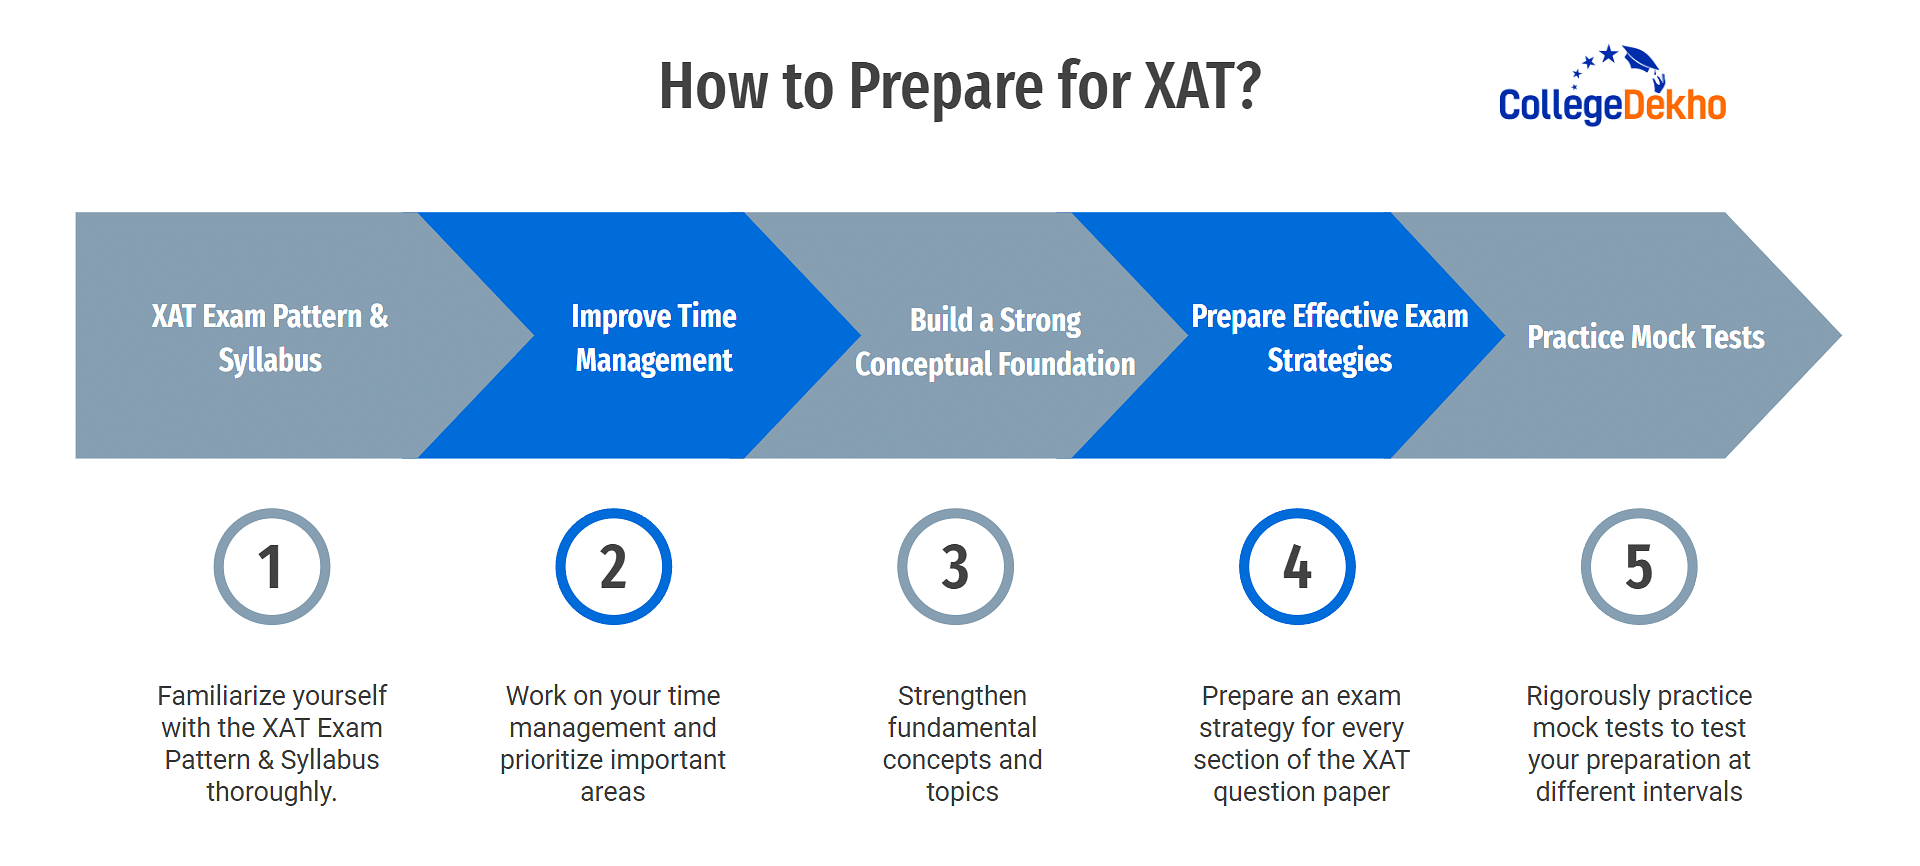 How to Prepare for XAT